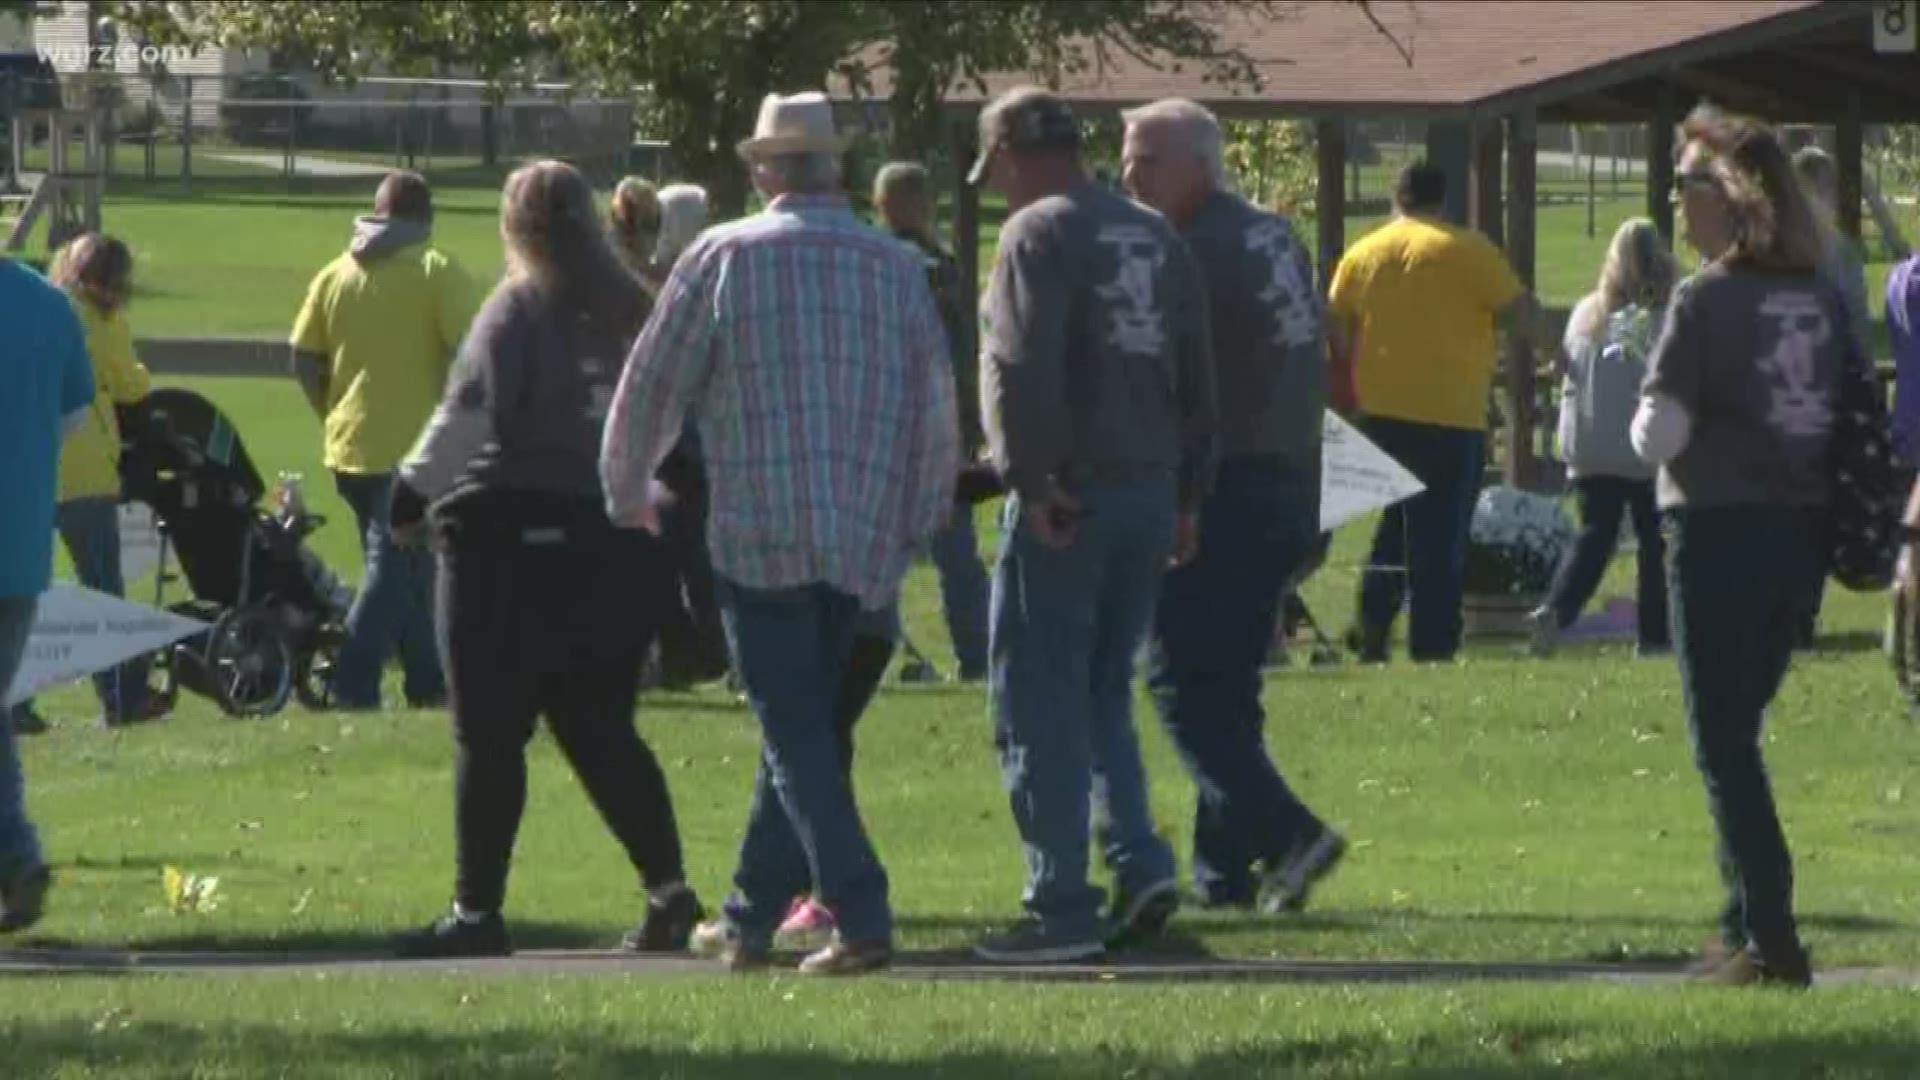 Today was the 27th Annual Walk to Remember. It highlights national pregnancy and infant loss and encourages support for families who have lost a baby.